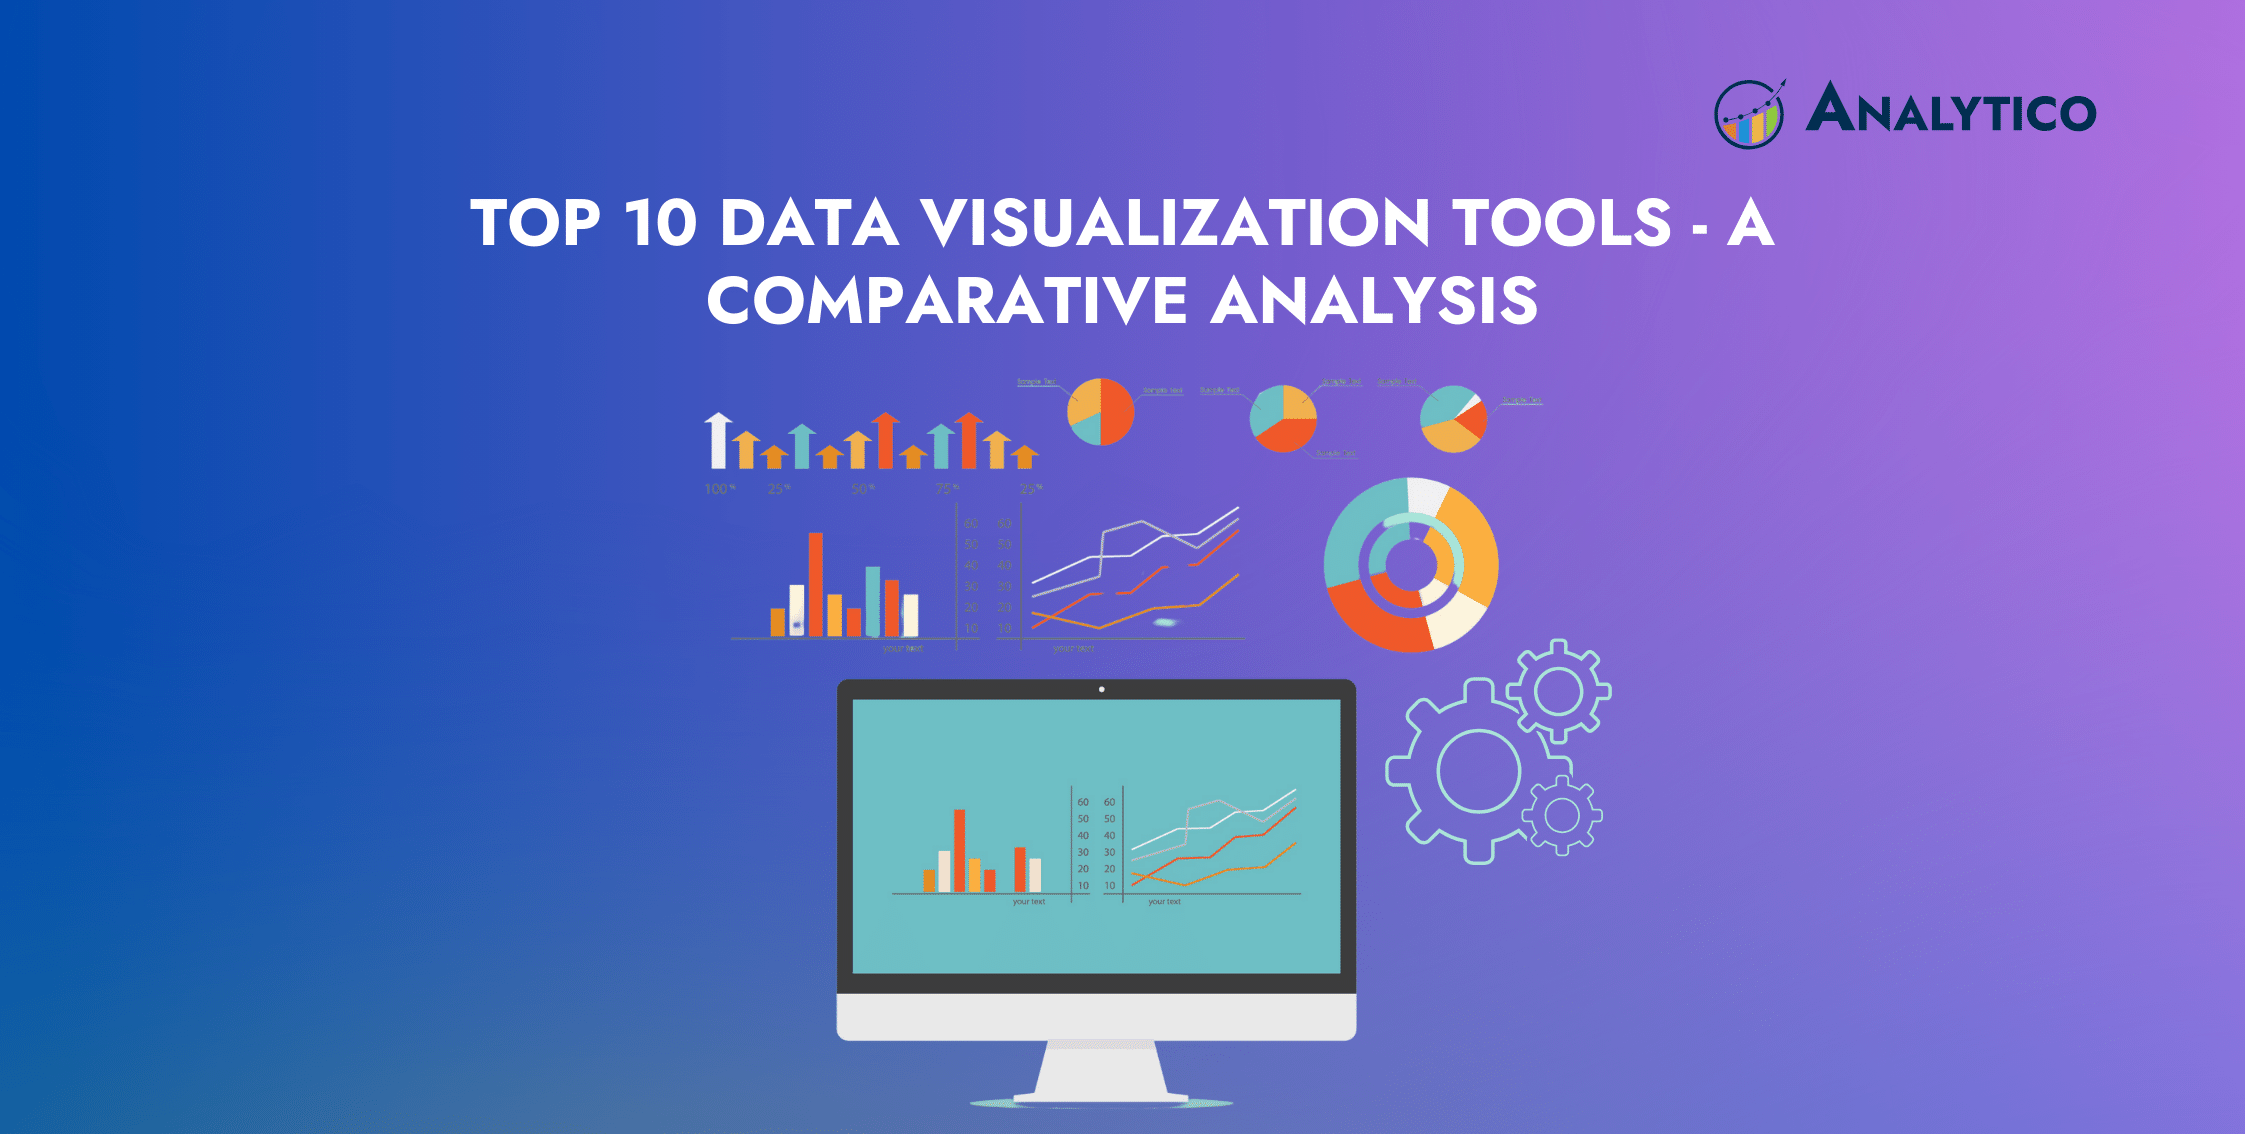 Top 10 Data Visualization Tools - A Comparative Analysis